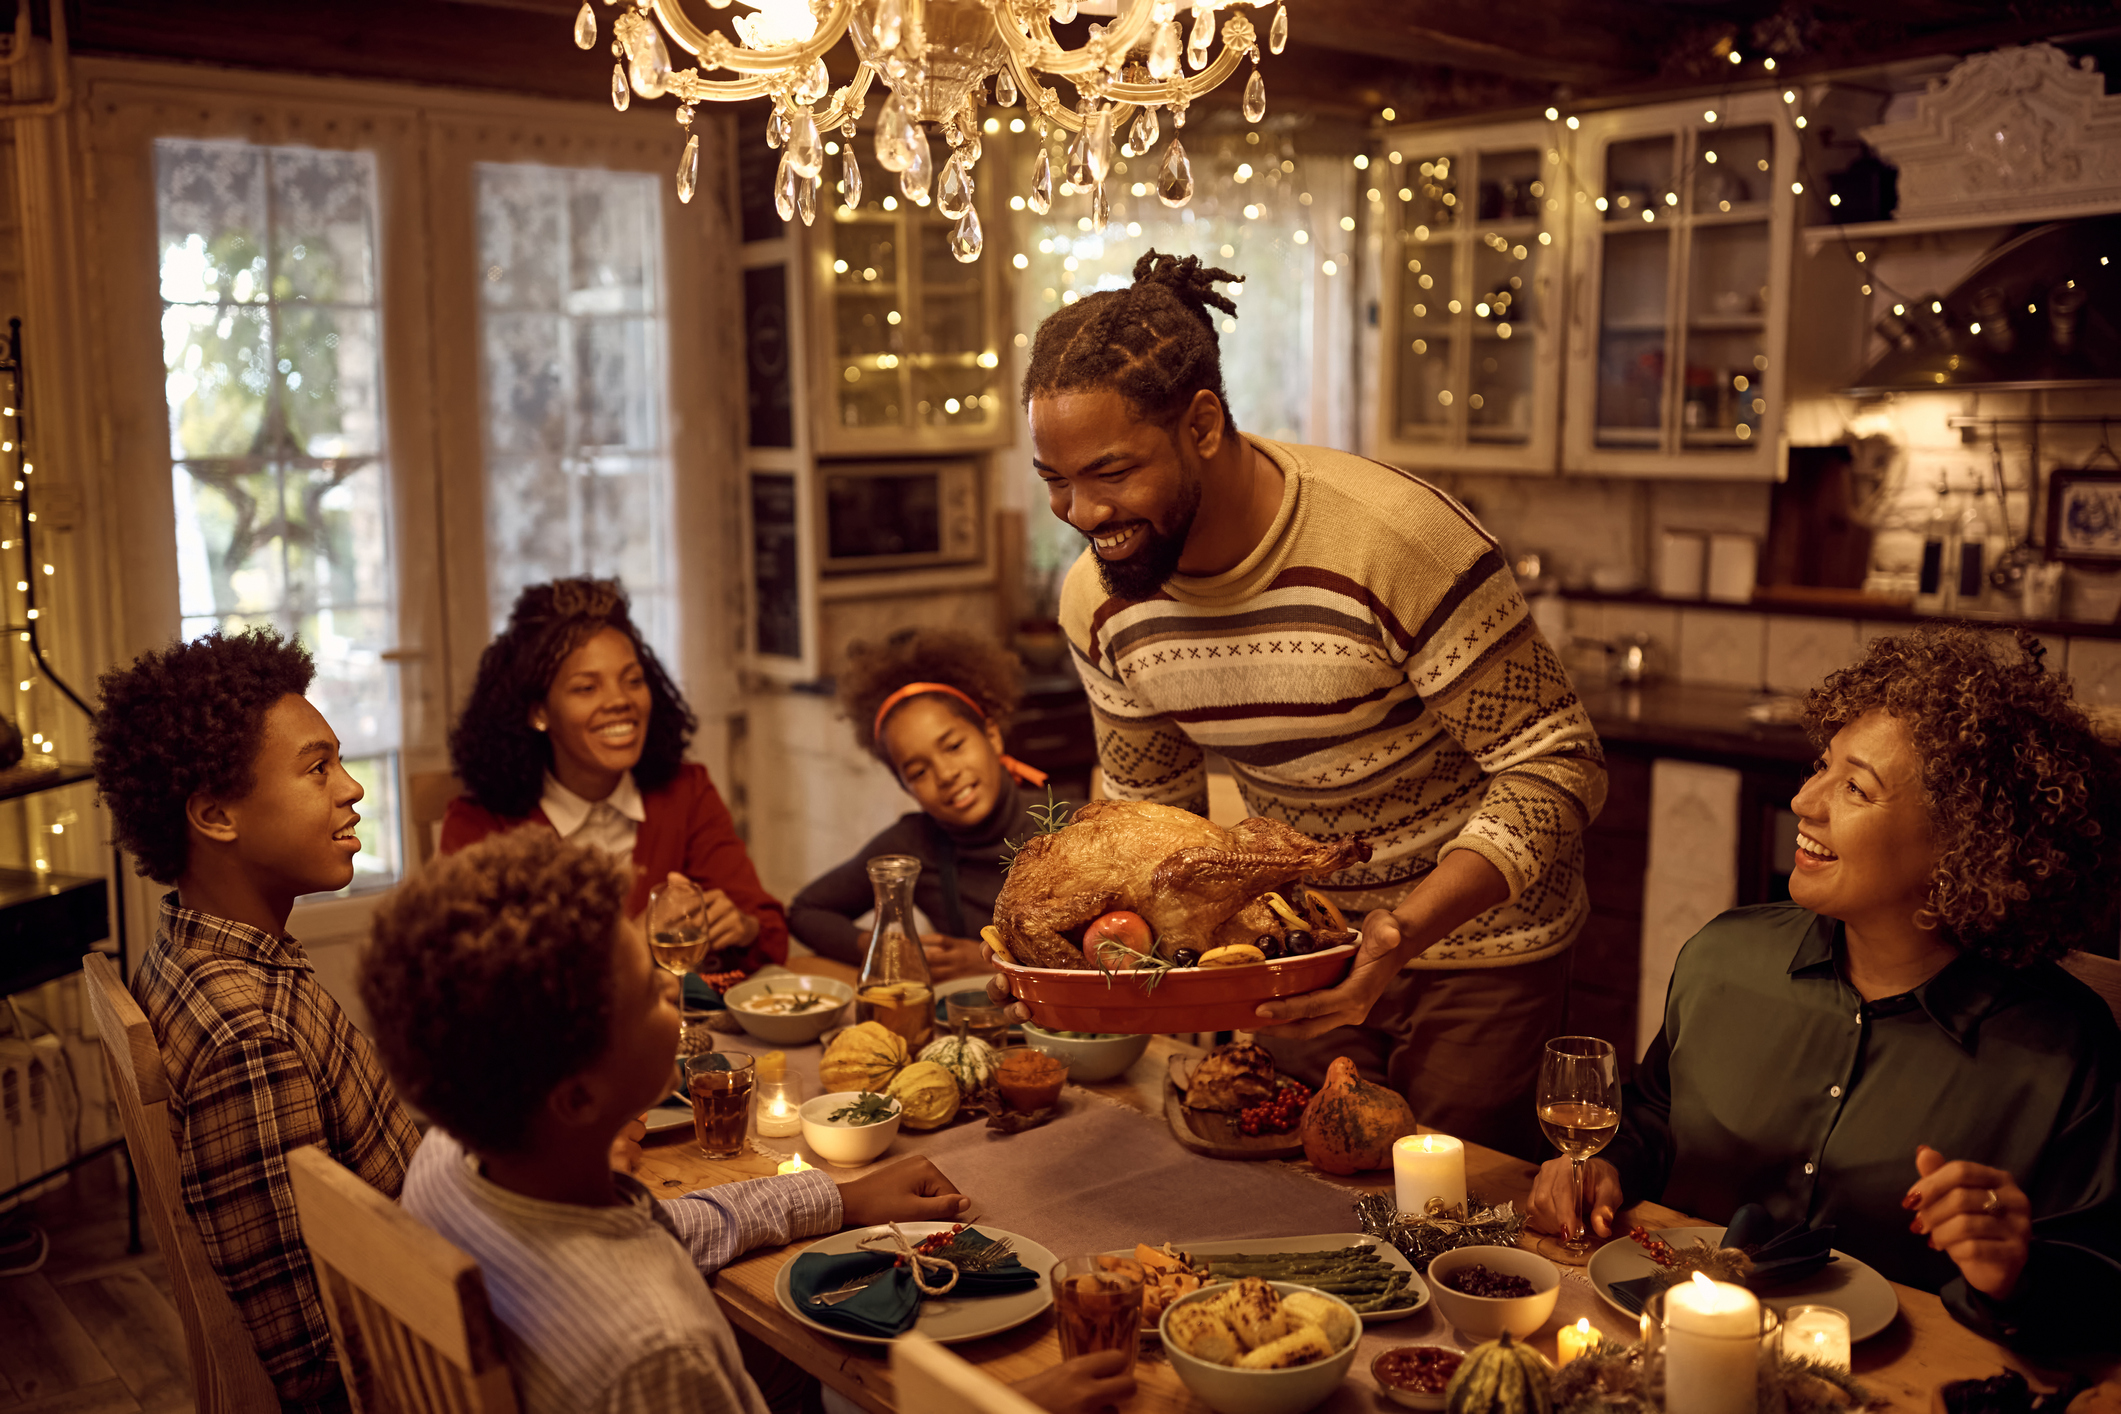 A family sharing a meal together for the holidays.